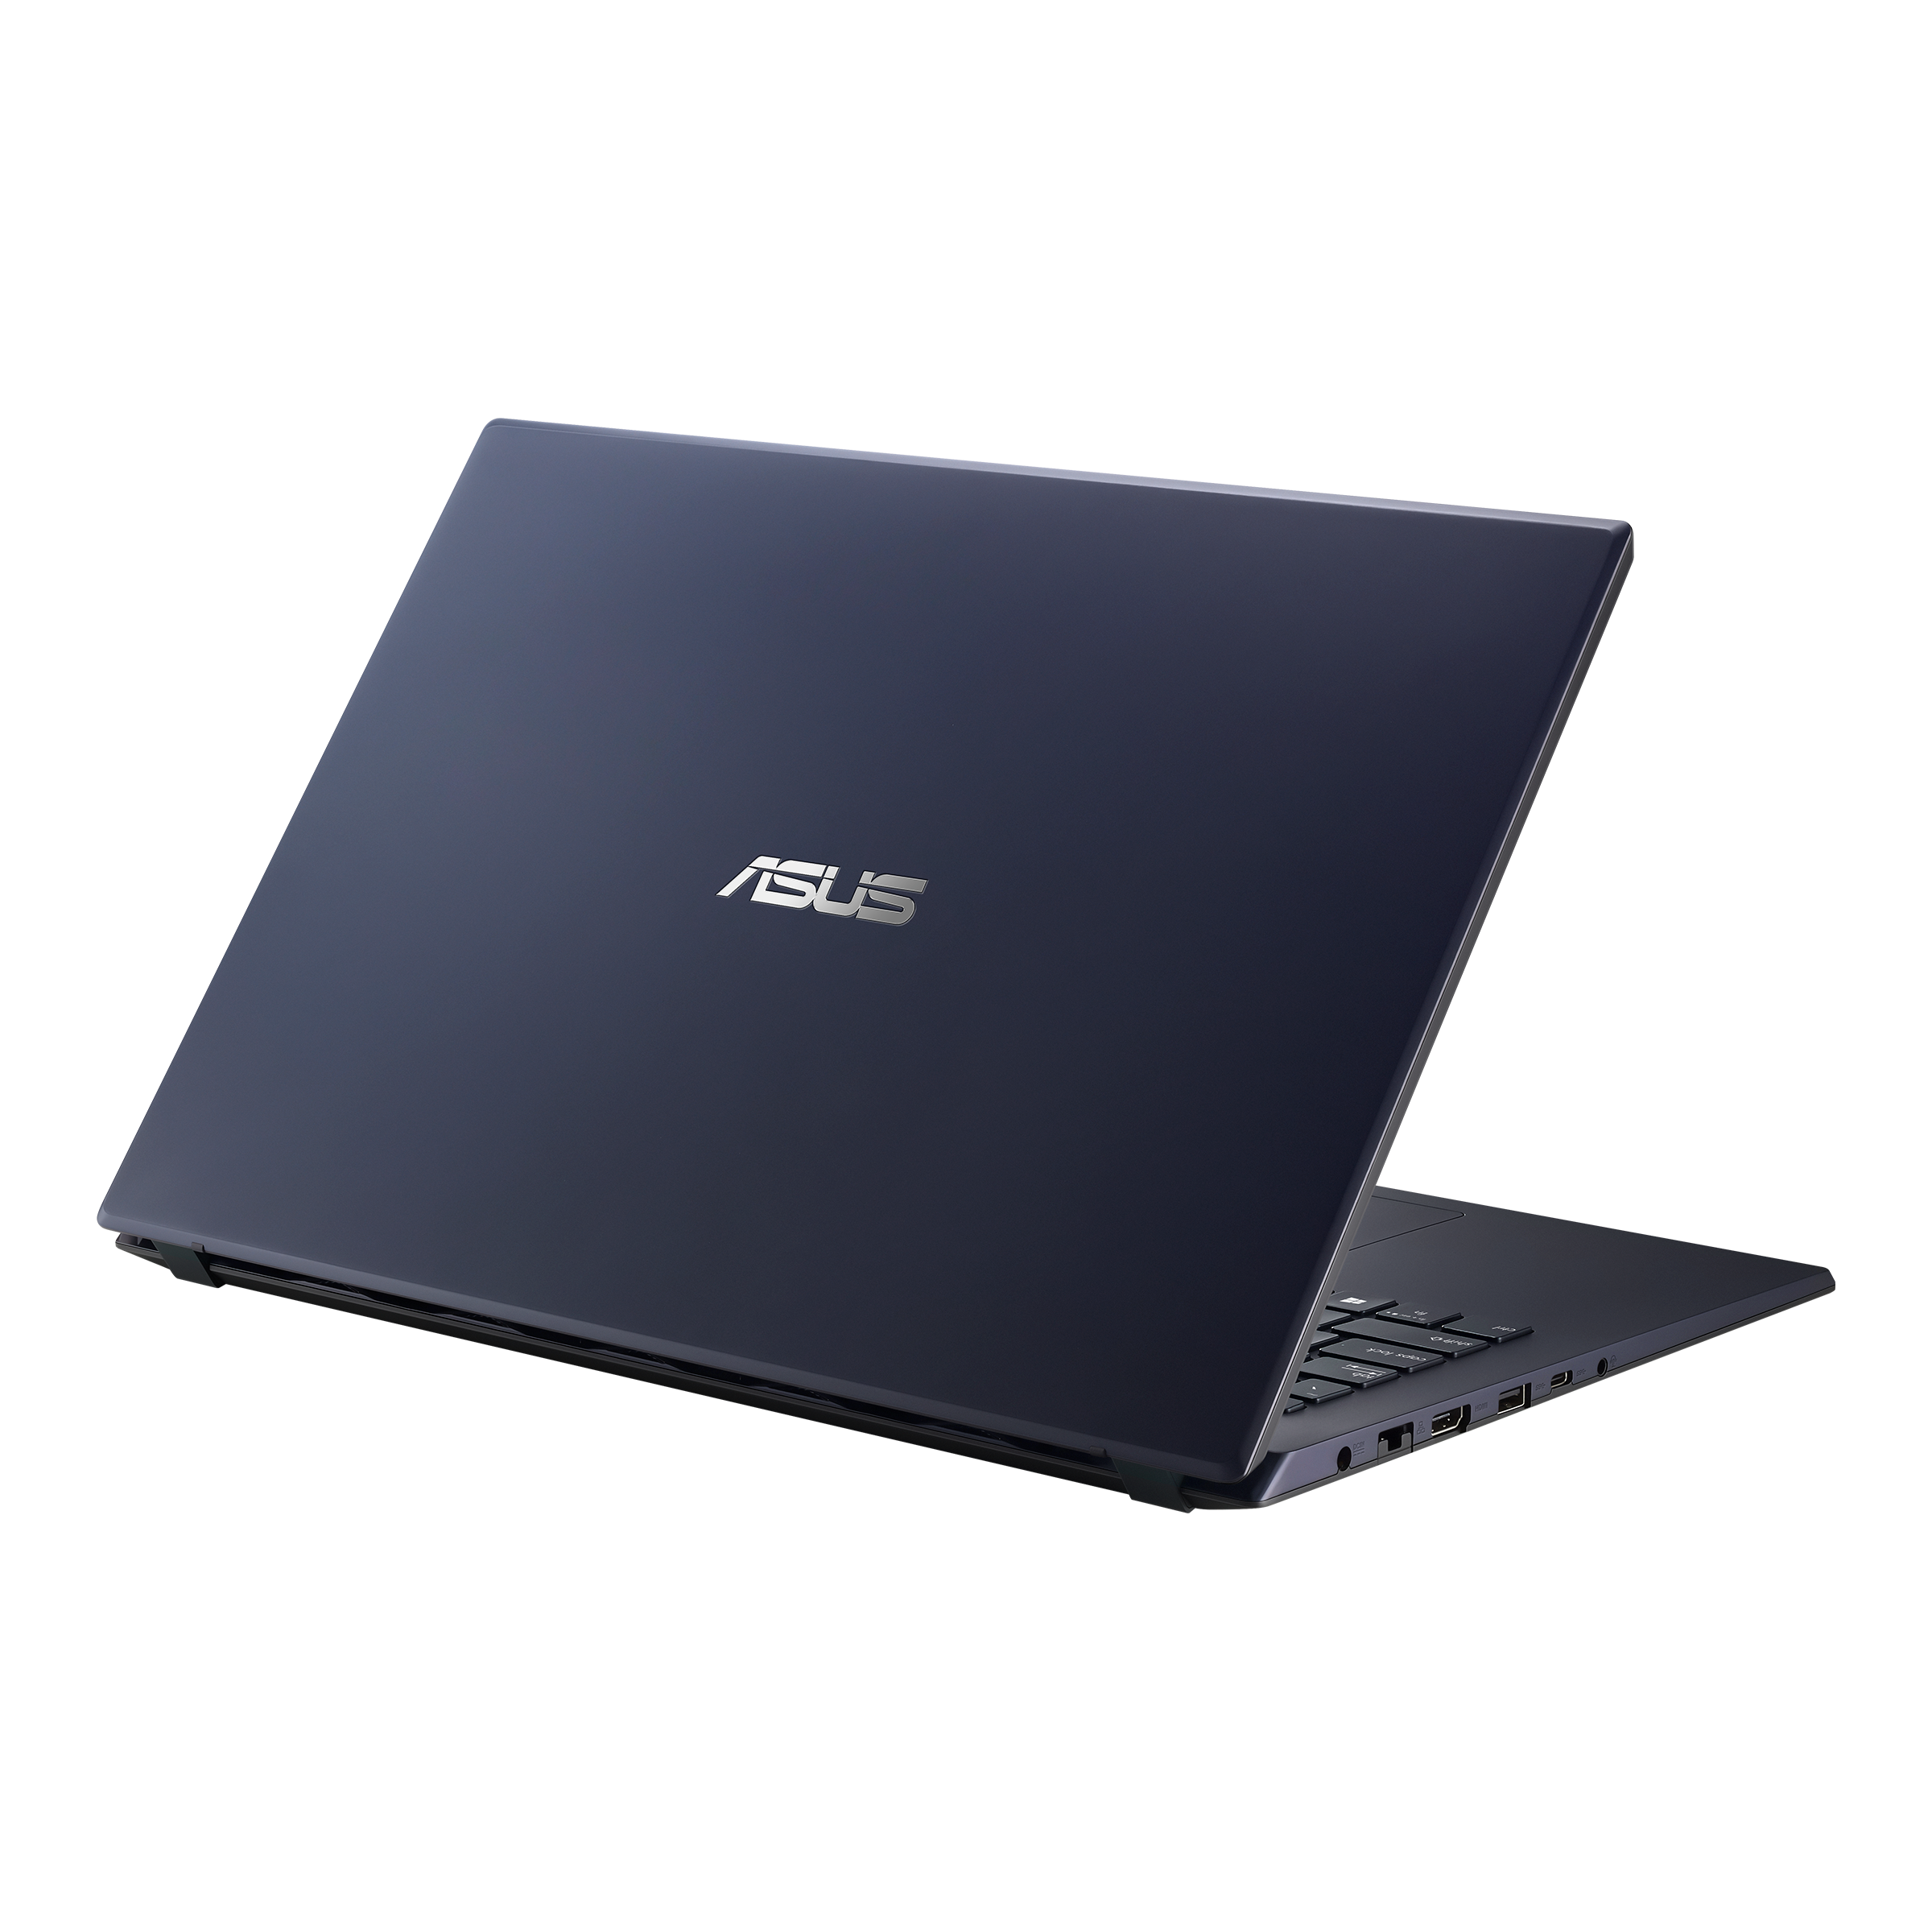 ASUS X571｜Laptops For Home｜ASUS Global